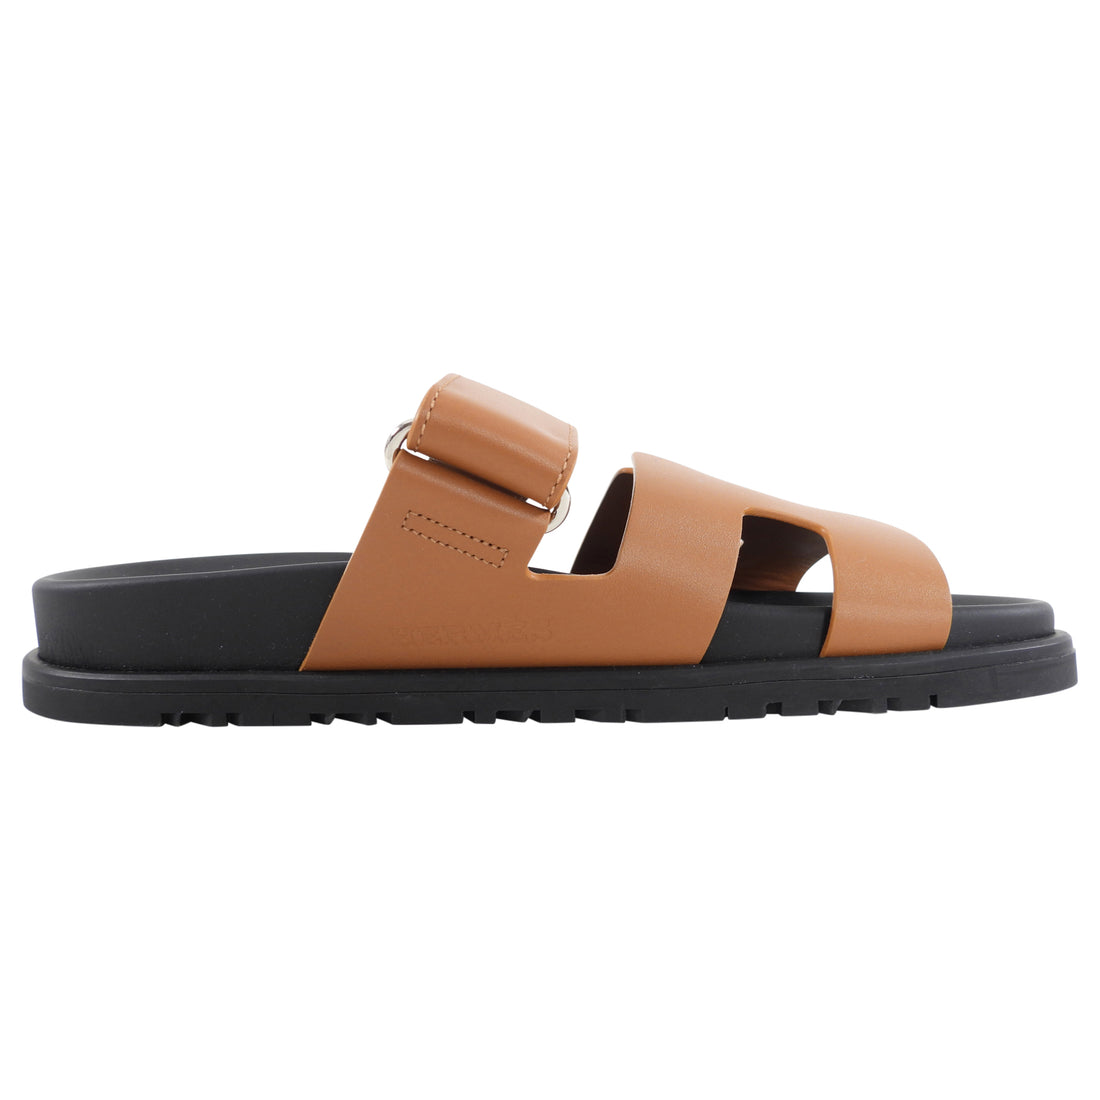 Hermes Tan Leather Chypre Flat Sandals - 37